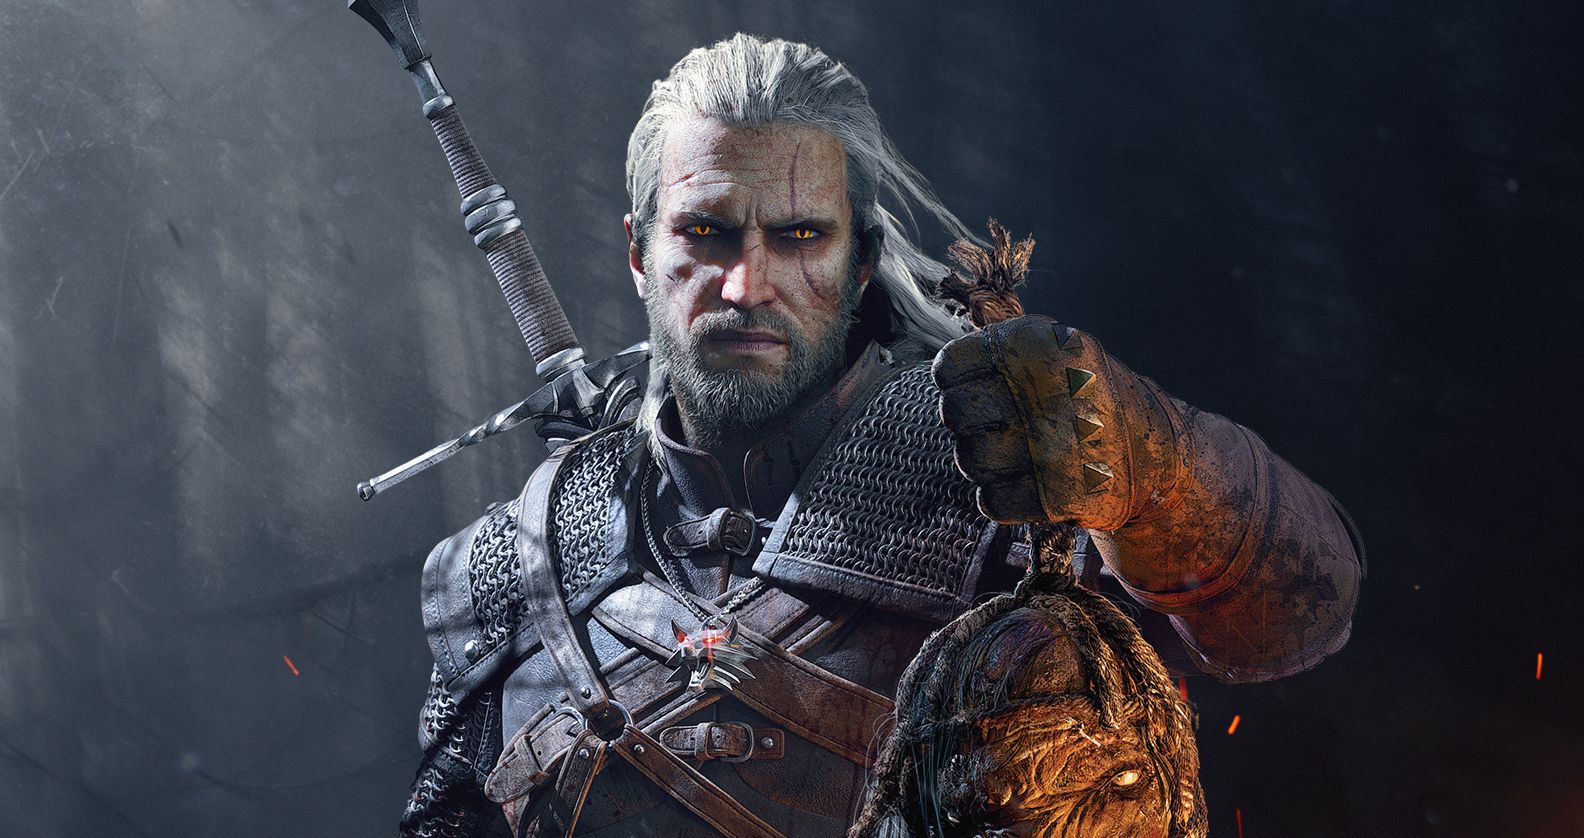 Image for The 10 best side quests in The Witcher 3